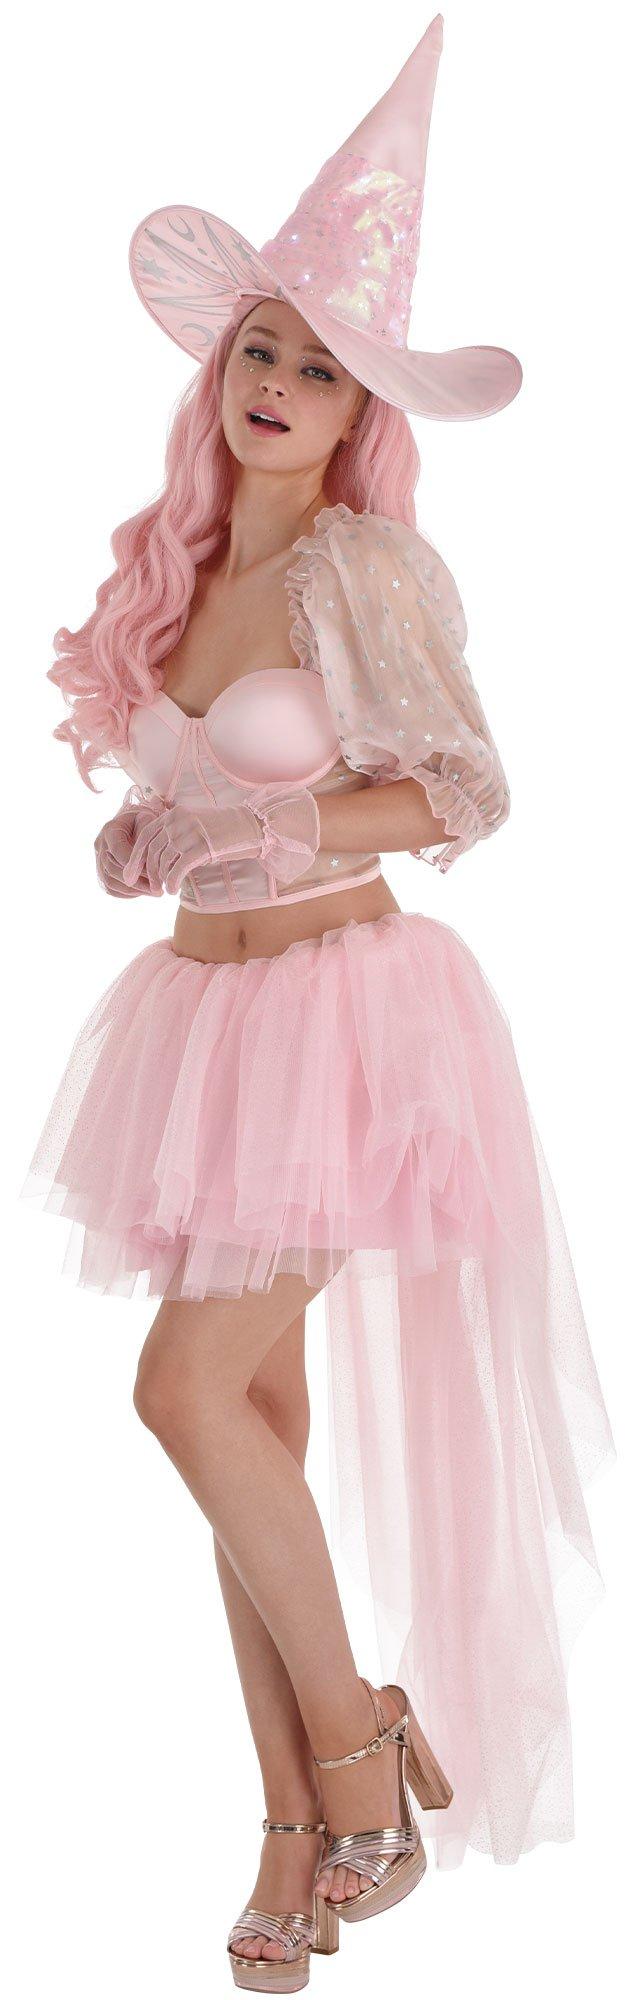 Adult Pink Bustle with Train